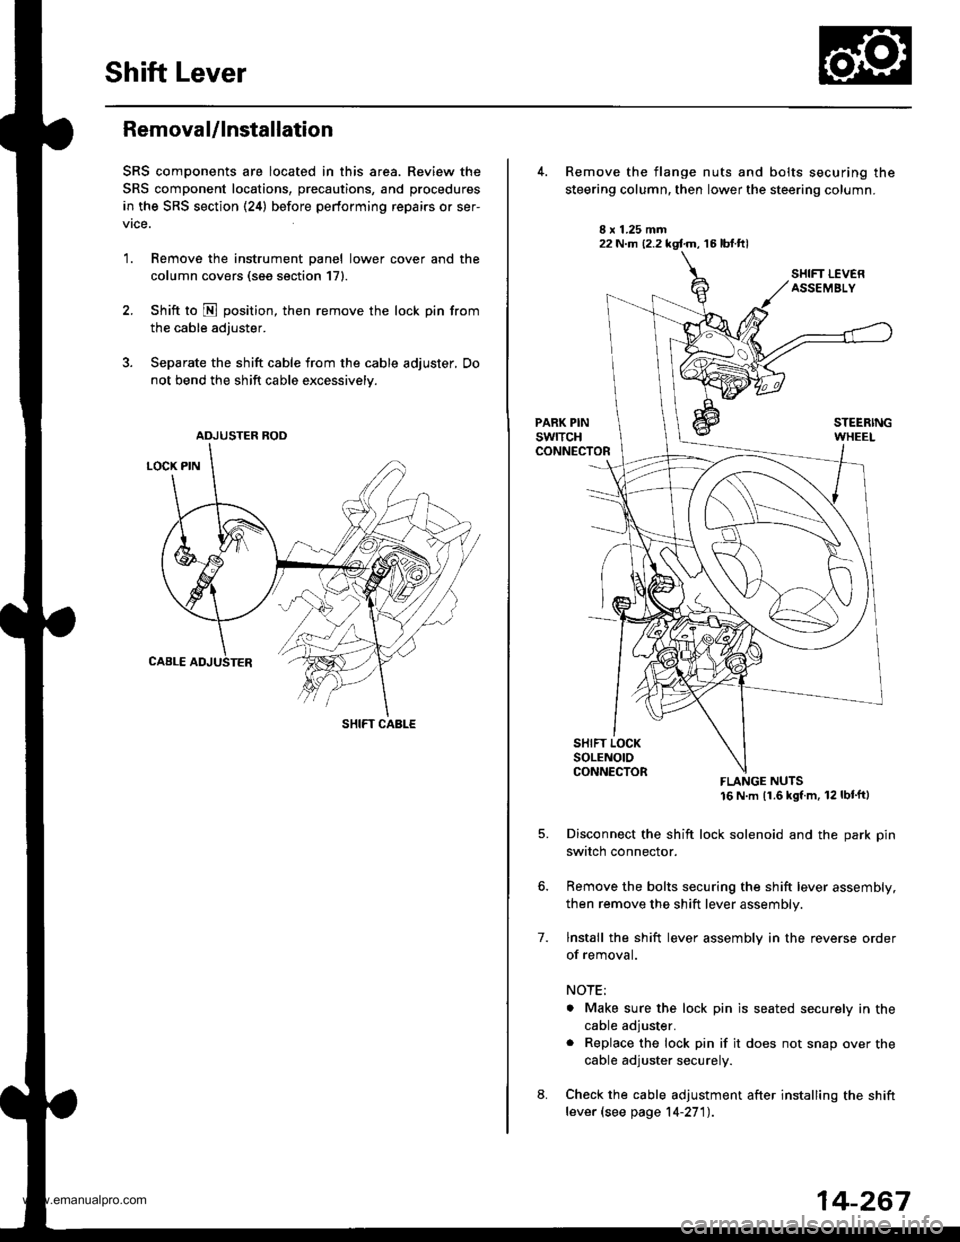 HONDA CR-V 1999 RD1-RD3 / 1.G Workshop Manual 
Shift Lever
Removal/lnstallation
SRS components are located in this area. Review the
SRS component locations, precautions, and procedures
in the SRS section (24) before performing repairs or ser-
vrc